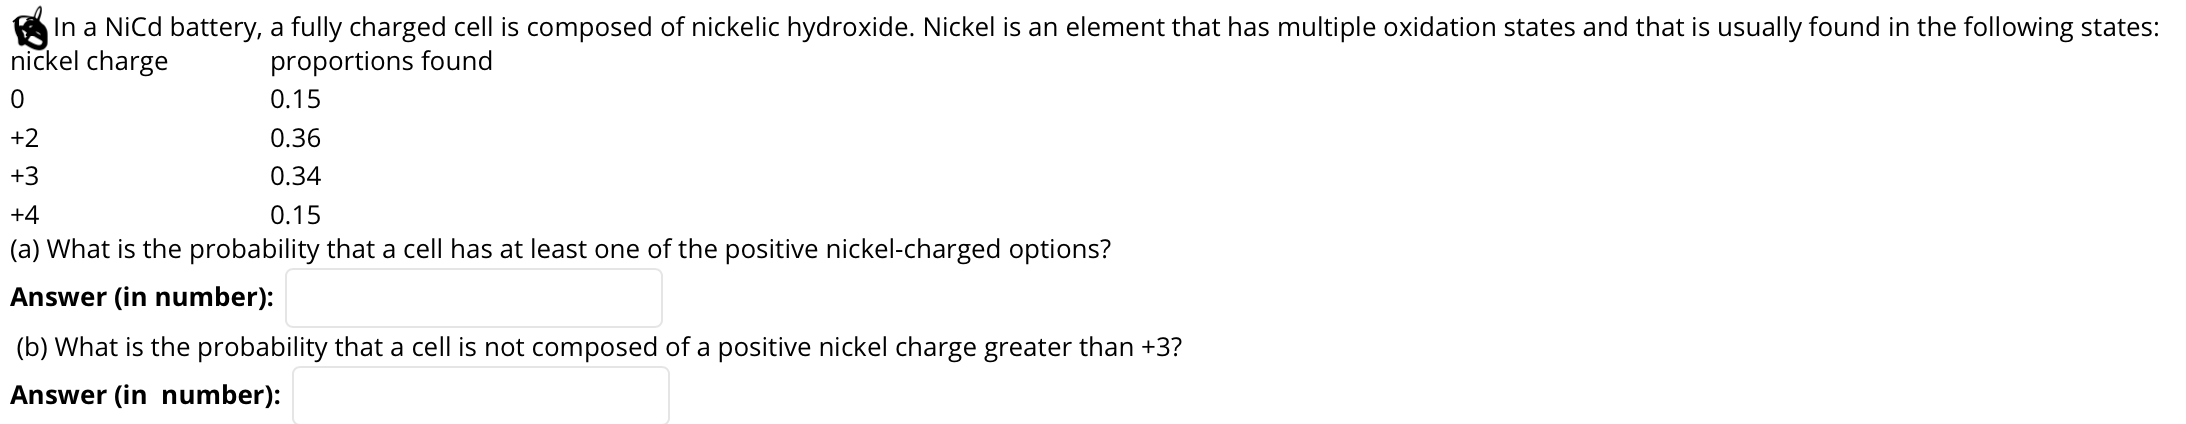 In a NiCd battery, a fully charged cell is composed of nickelic hydroxide. Nickel is an element that has multiple oxidation states and that is usually found in the following states:
nickel charge
proportions found
0.15
+2
0.36
+3
0.34
+4
0.15
(a) What is the probability that a cell has at least one of the positive nickel-charged options?
Answer (in number):
(b) What is the probability that a cell is not composed of a positive nickel charge greater than +3?
